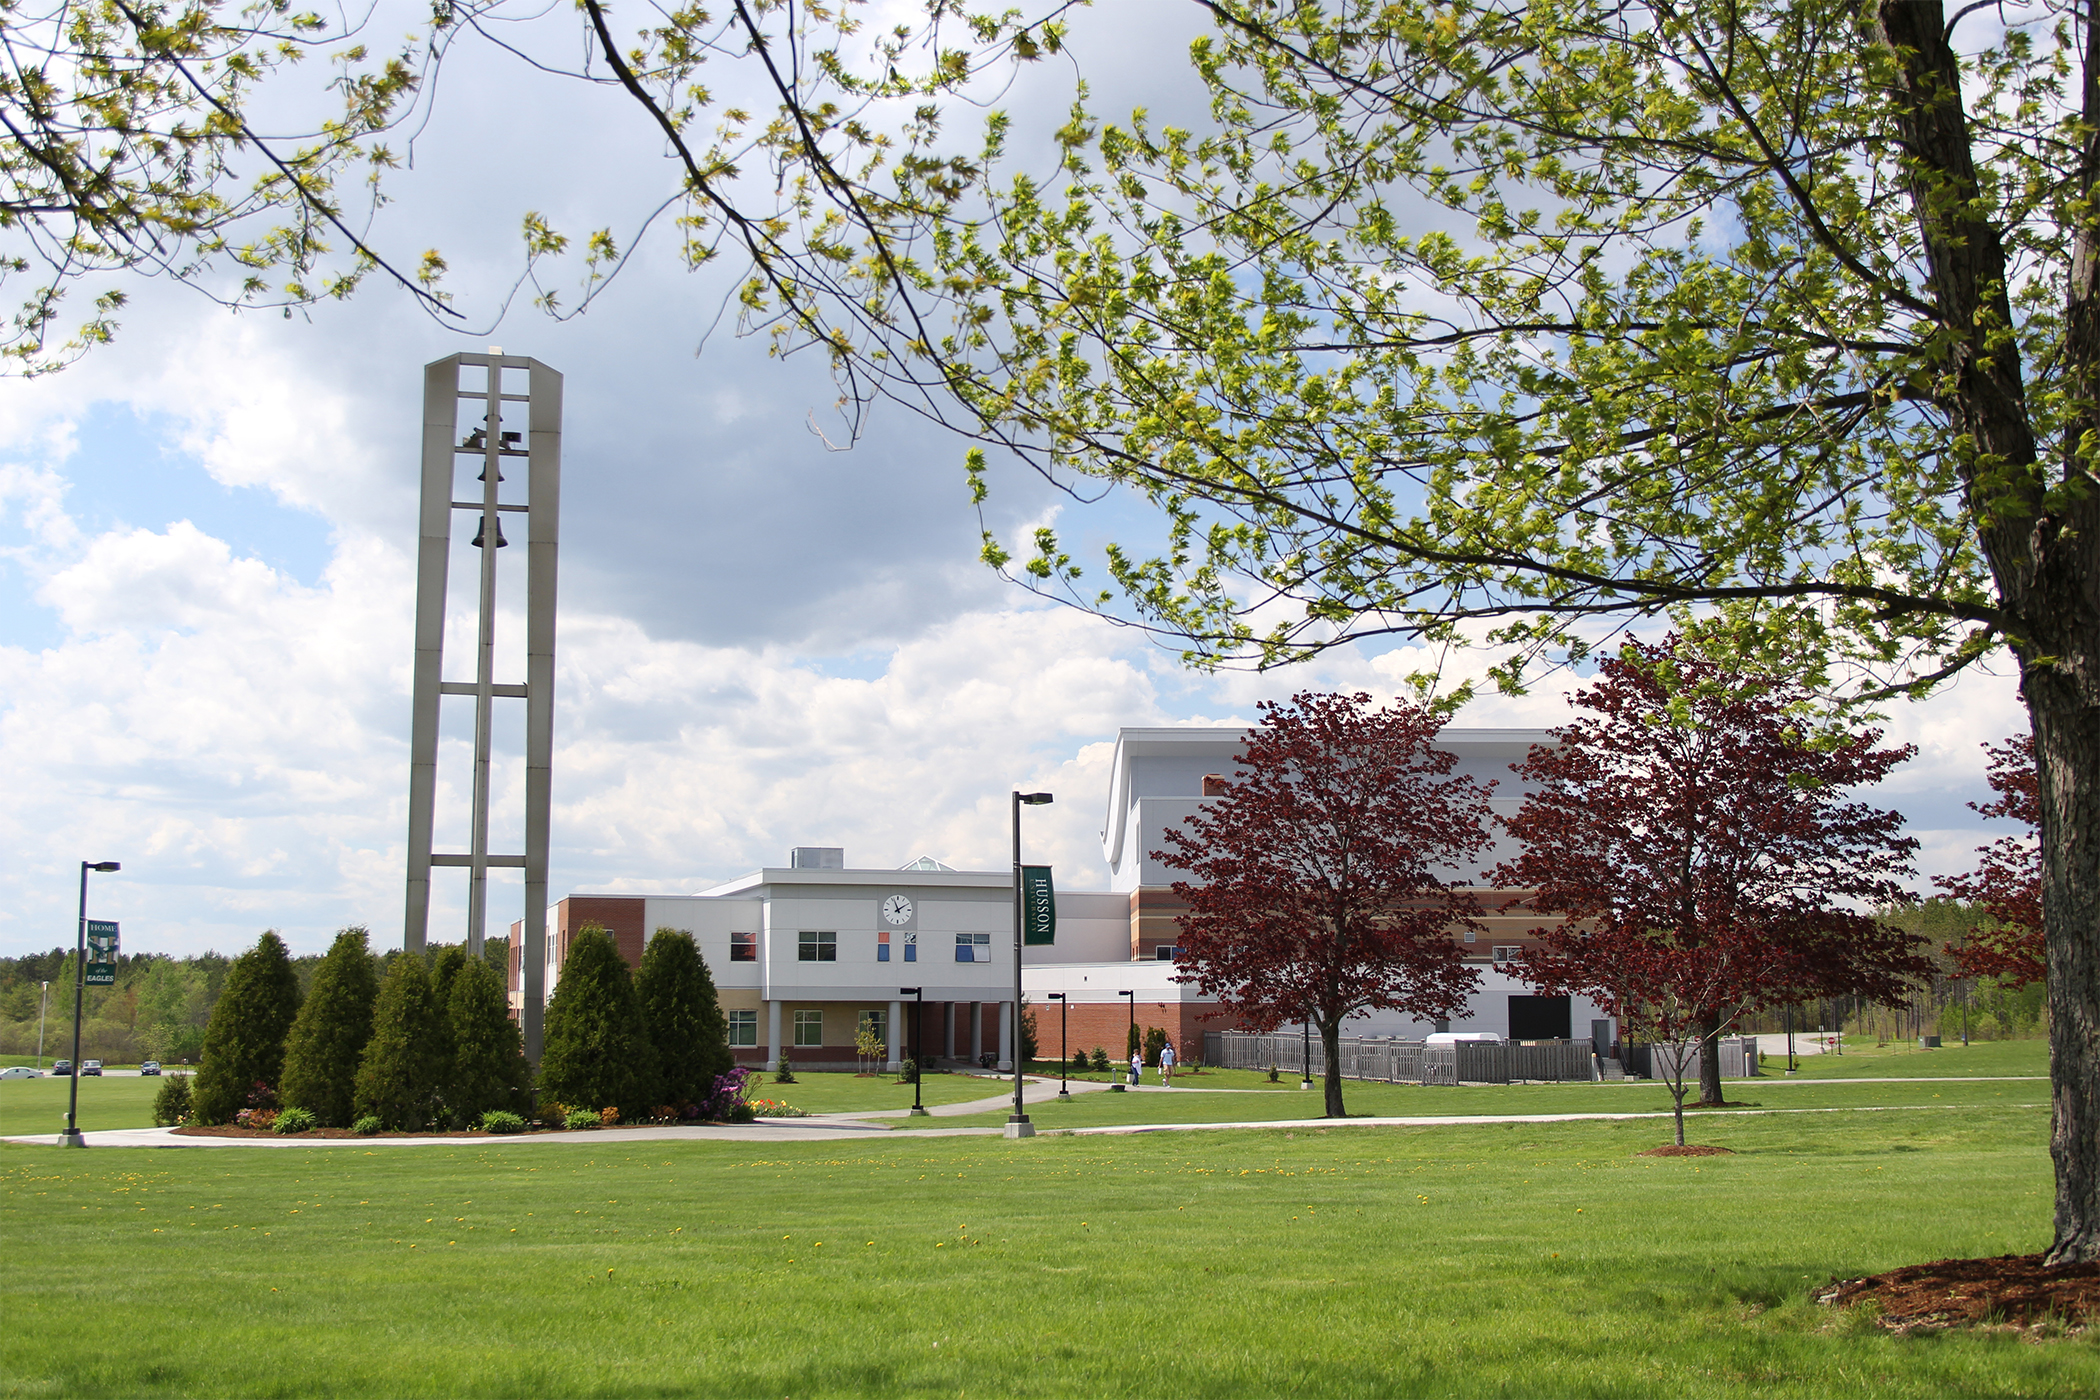 The campus of Husson University in Bangor, Maine.